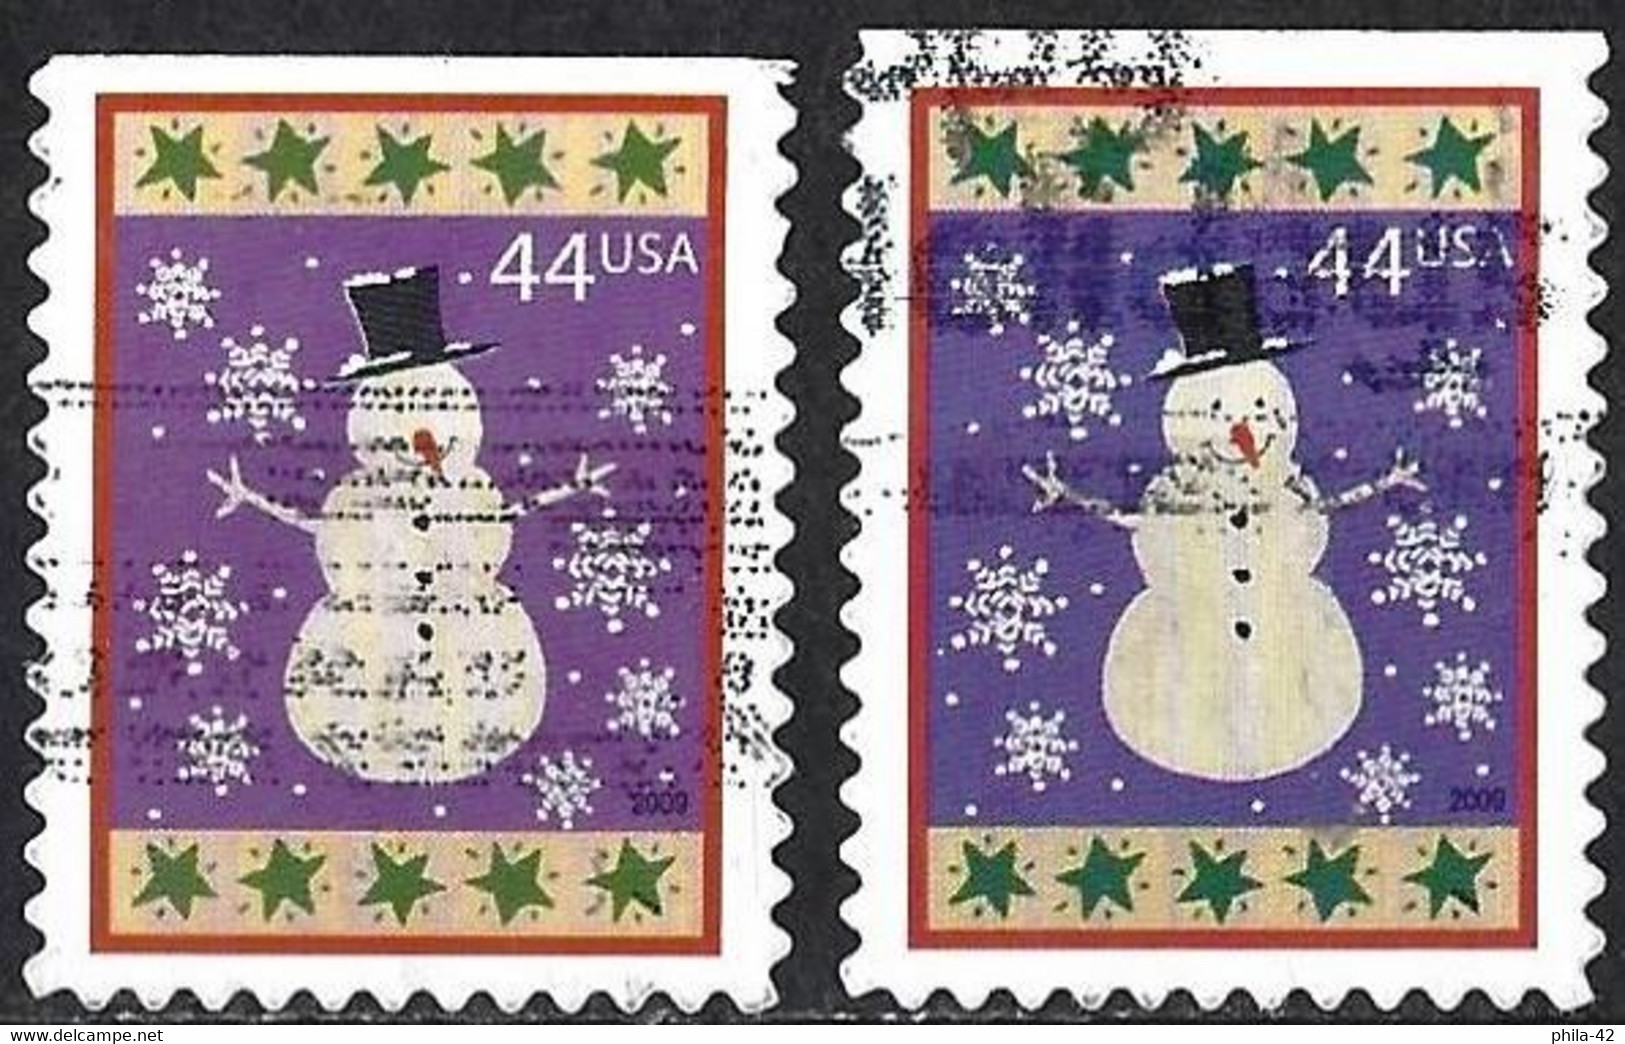 United States 2009 - Mi 4565 BD - YT 4228 ( Christmas - Snowman ) Perf. 10¾ X 11 - Two Shades Of Color - Errors, Freaks & Oddities (EFOs)